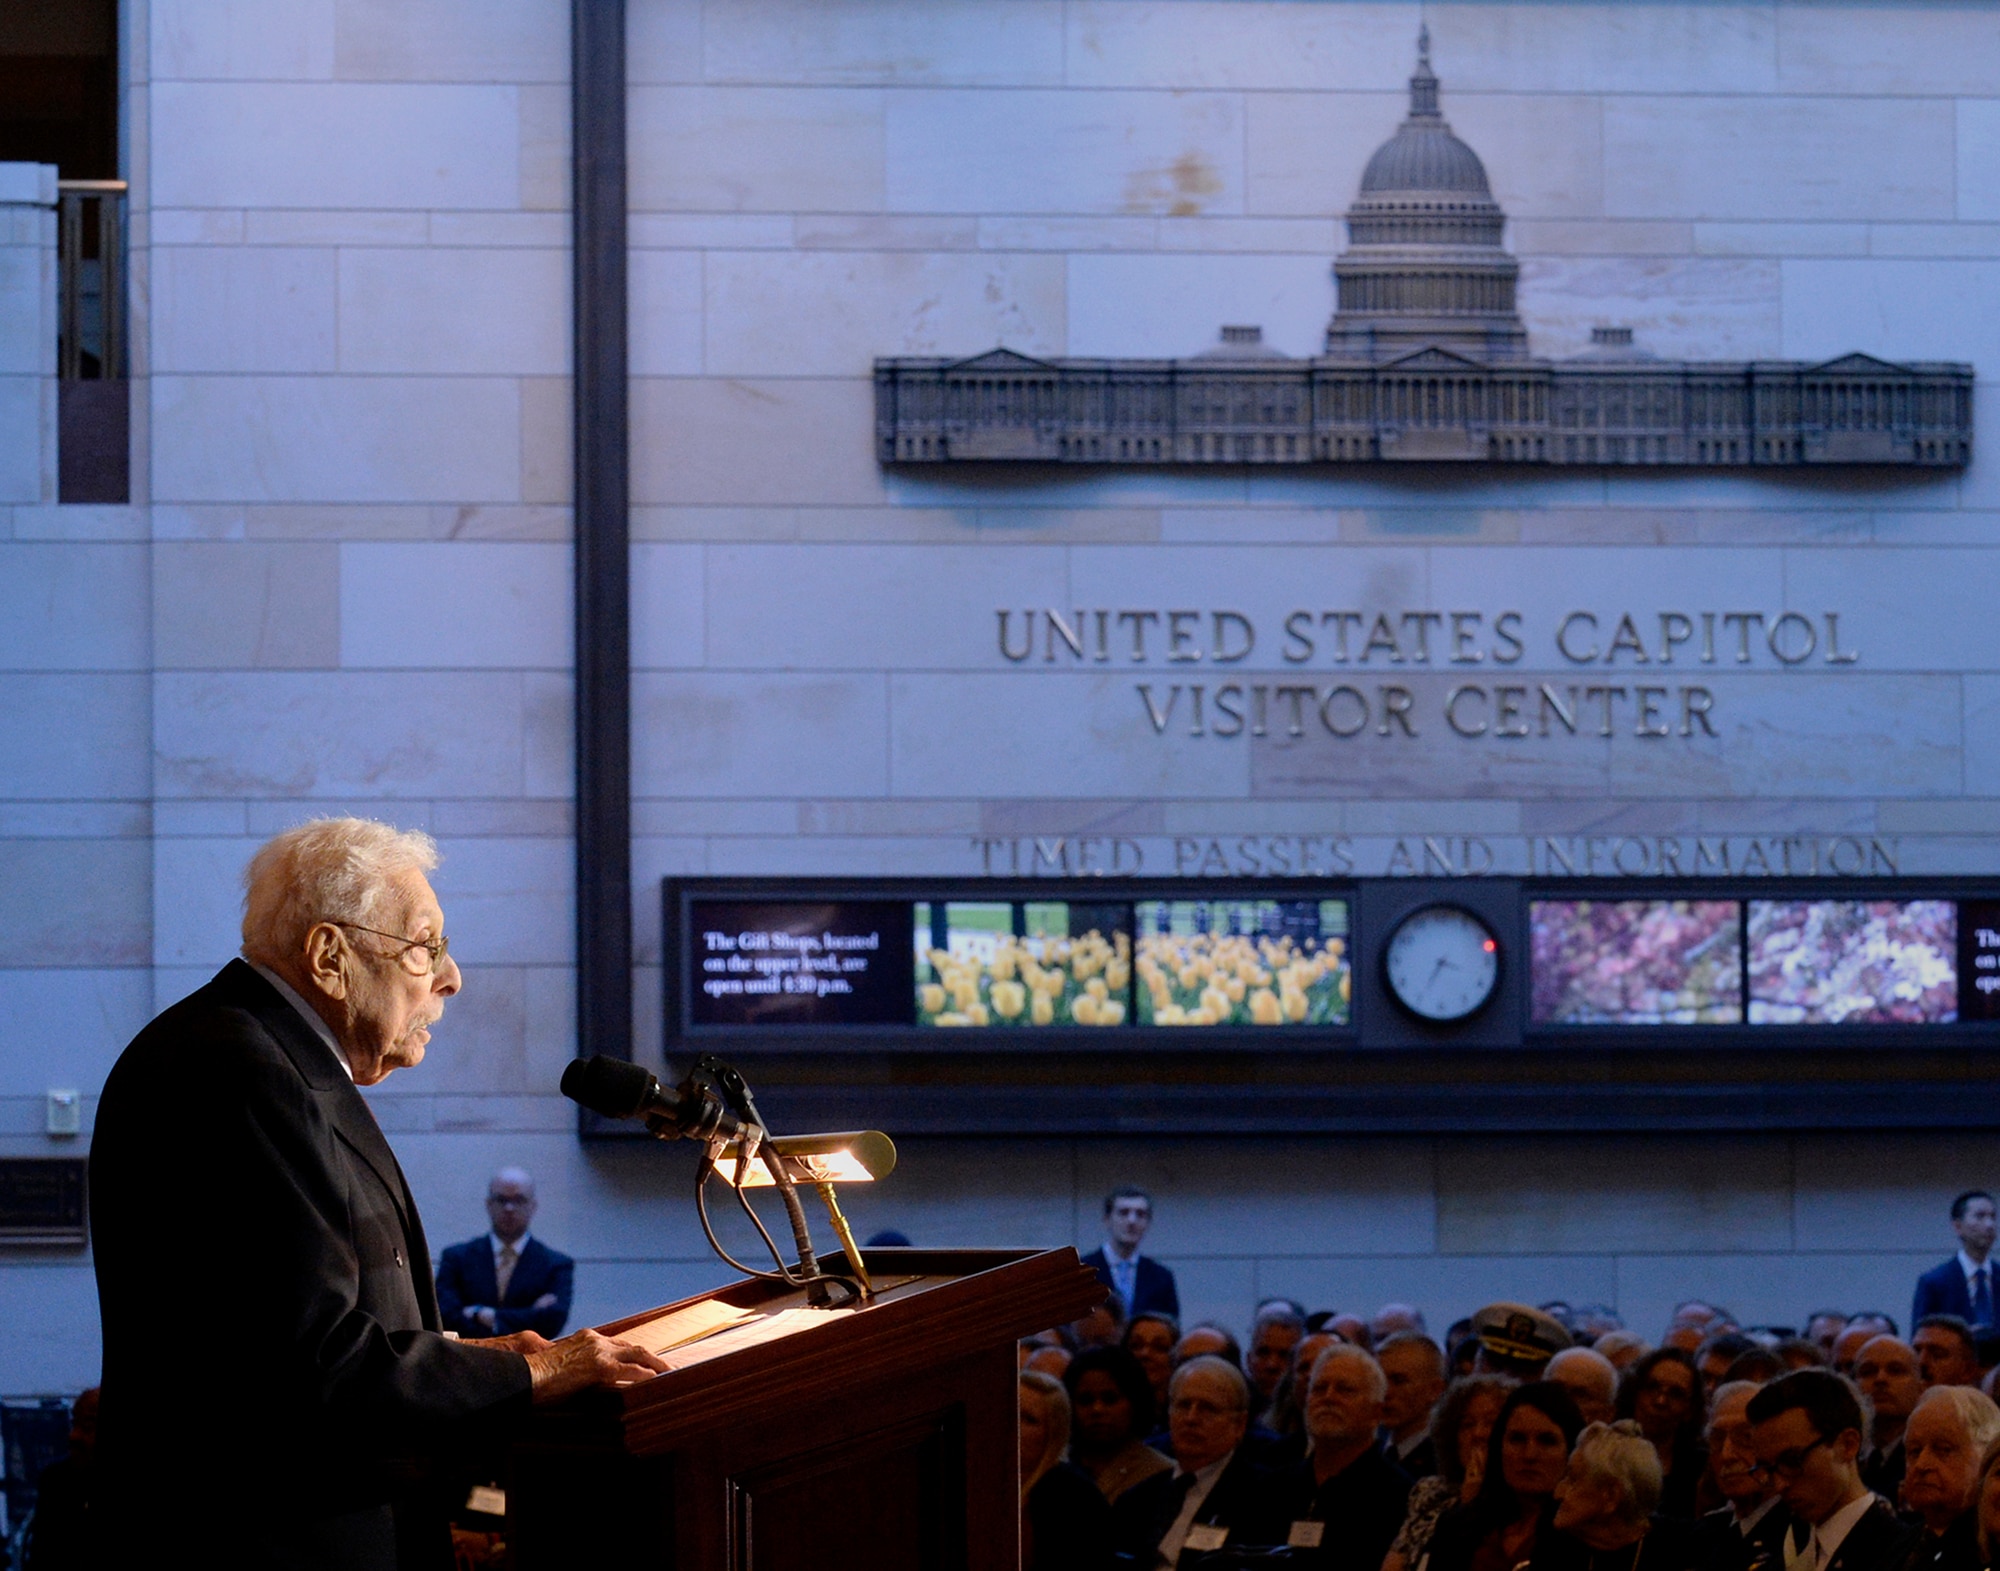 Lester Wolff, a former member of Congress and Civil Air Patrol veteran, shares a few words during a Congressional Gold Medal ceremony honoring the CAP World War II members Dec. 10, 2014, on Capitol Hill, Washington, D.C. (U.S. Air Force/Andy Morataya)